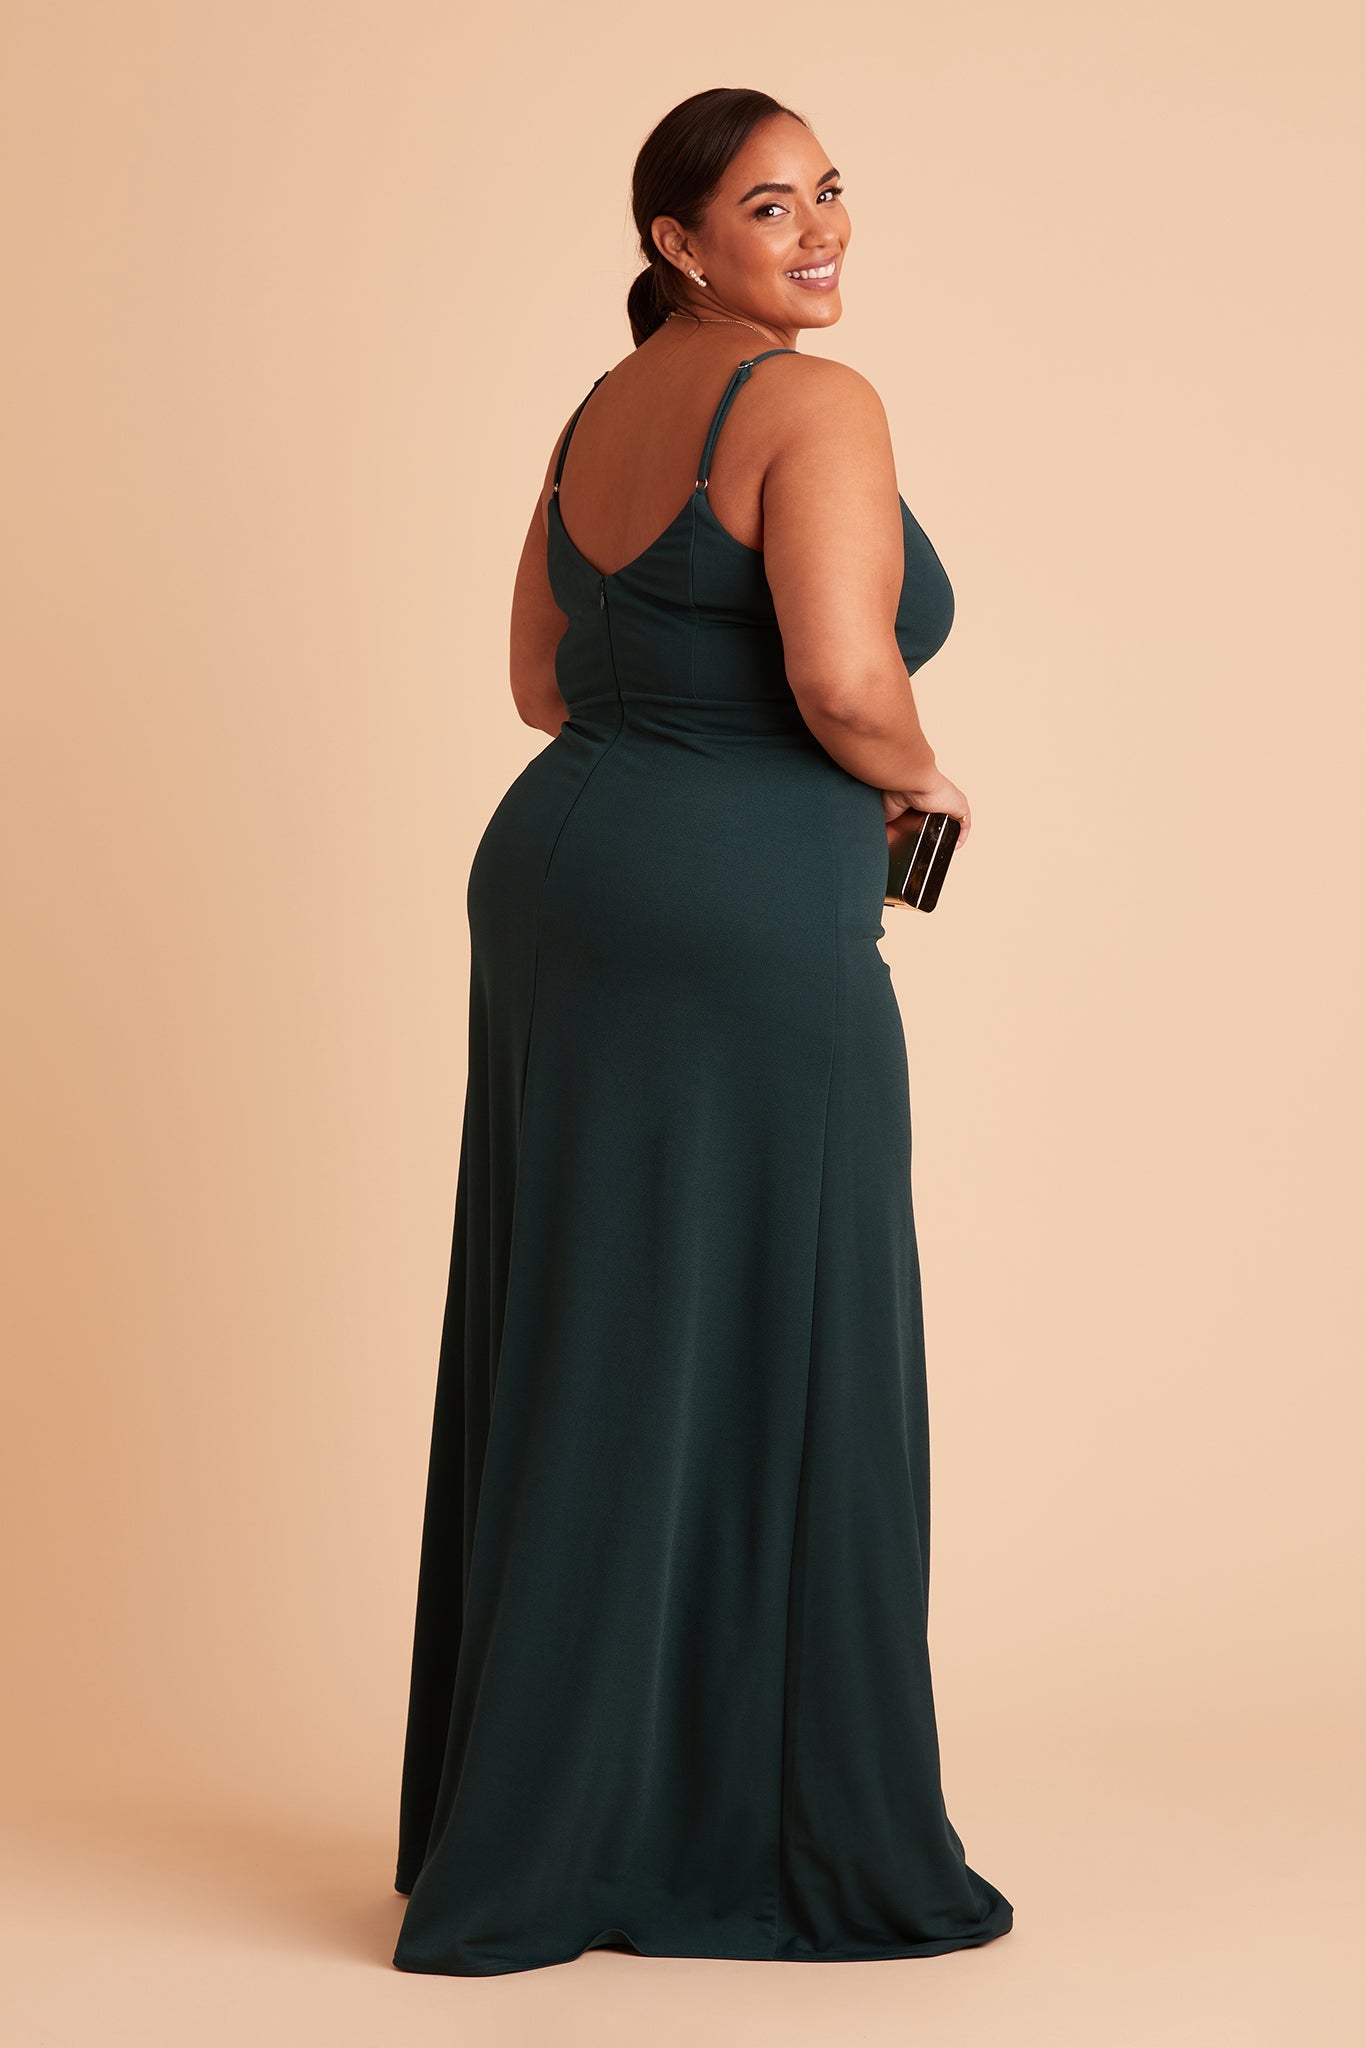 Jay plus size bridesmaid dress with slit in emerald crepe by Birdy Grey, side view